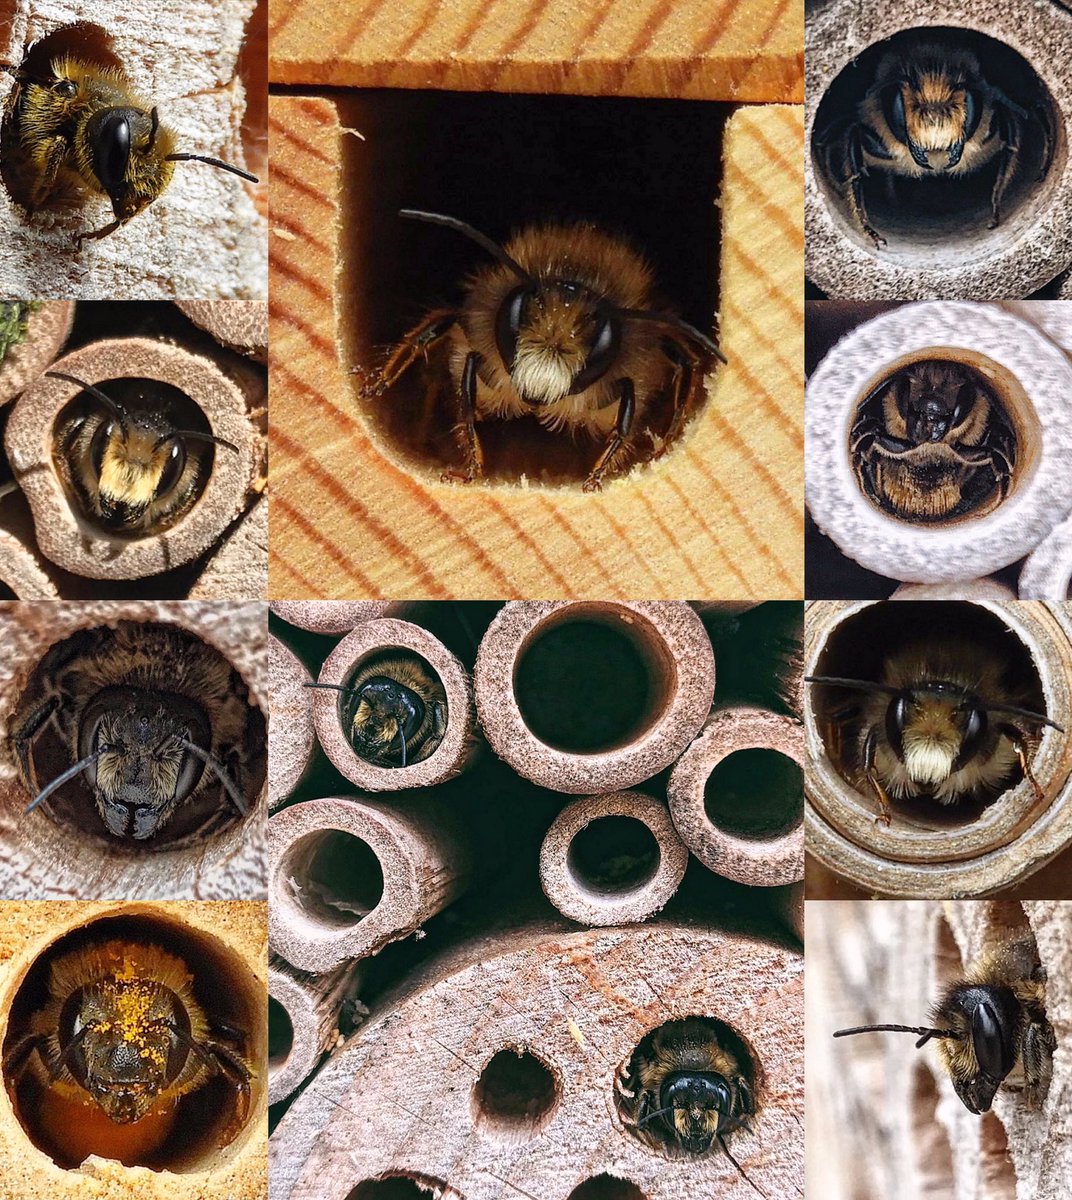 Just a few of my bee hotel guests from over the years ☺️